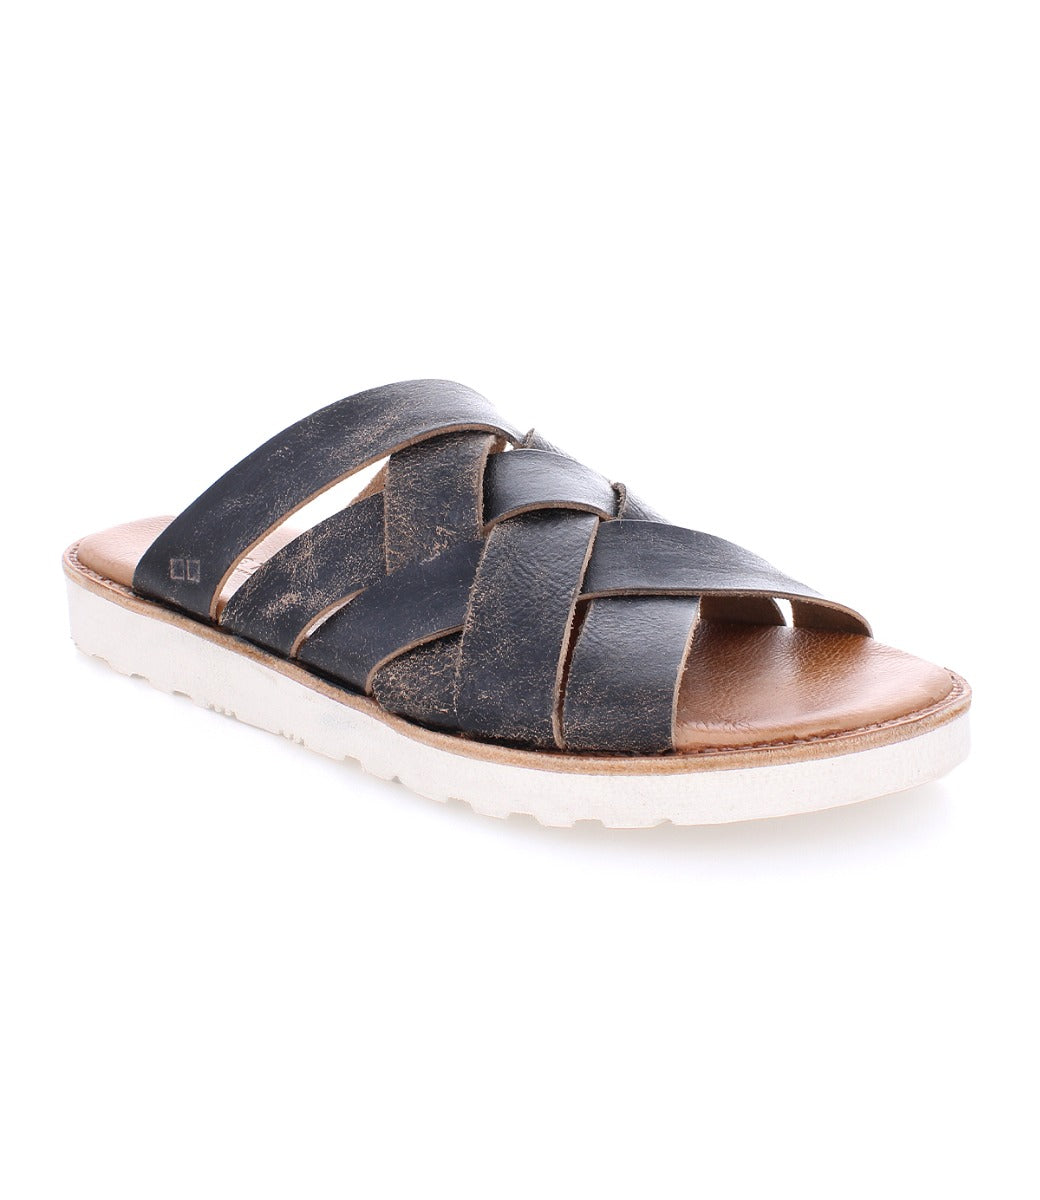 A single Abraham Light slide sandal with thick straps and a white sole, isolated on a white background. (Bed Stu)